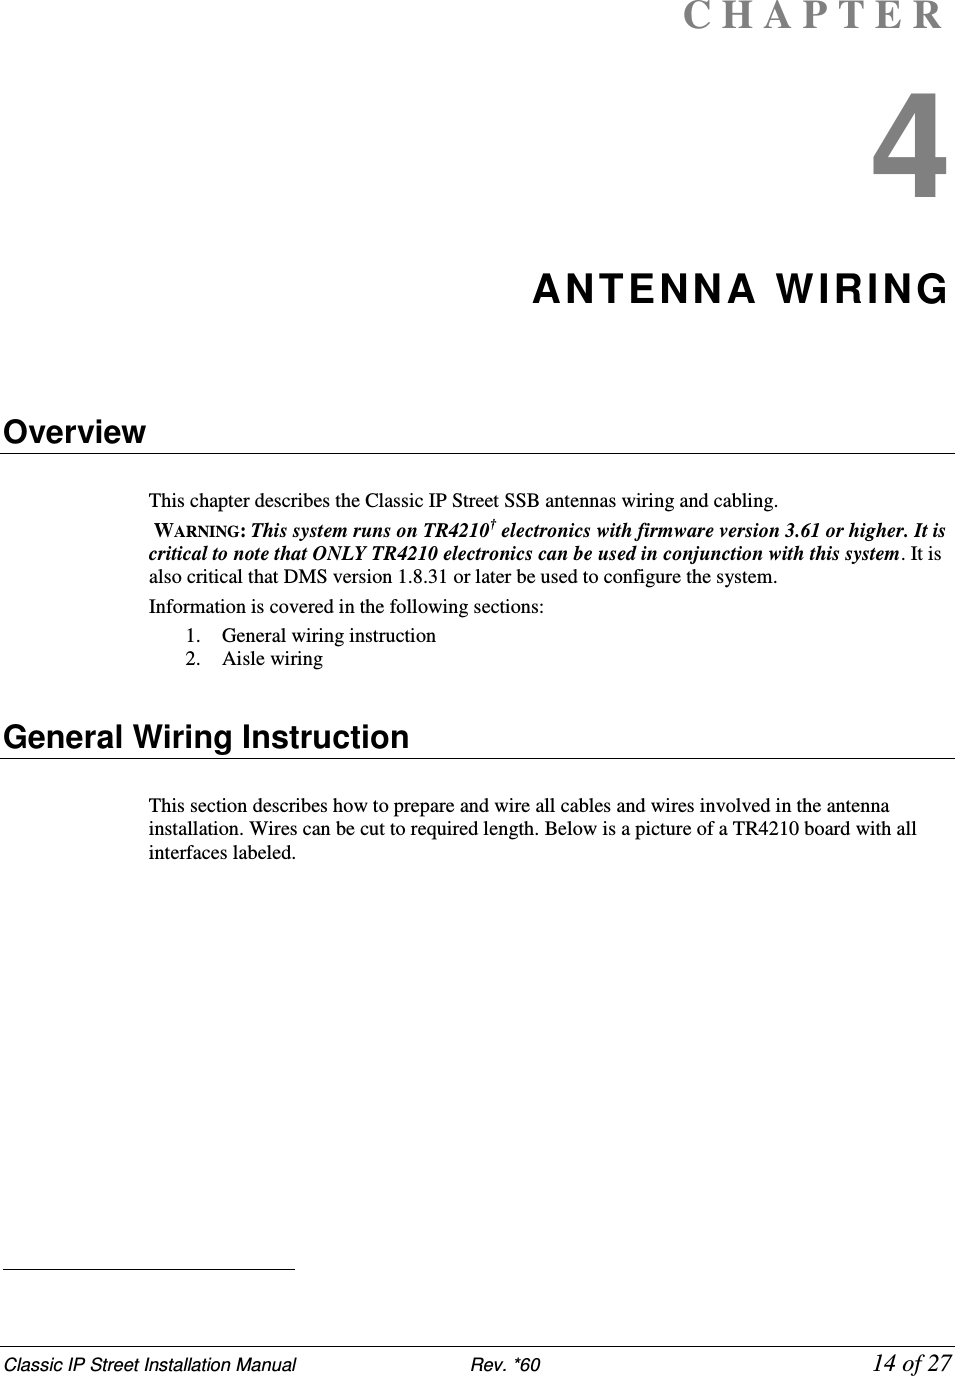 Classic IP Street Installation Manual                           Rev. *60             14 of 27 C H A P T E R  4 ANTENN A WIRING    Overview  This chapter describes the Classic IP Street SSB antennas wiring and cabling.  WARNING: This system runs on TR4210† electronics with firmware version 3.61 or higher. It is critical to note that ONLY TR4210 electronics can be used in conjunction with this system. It is also critical that DMS version 1.8.31 or later be used to configure the system. Information is covered in the following sections: 1. General wiring instruction 2. Aisle wiring    General Wiring Instruction  This section describes how to prepare and wire all cables and wires involved in the antenna installation. Wires can be cut to required length. Below is a picture of a TR4210 board with all interfaces labeled.                                                    